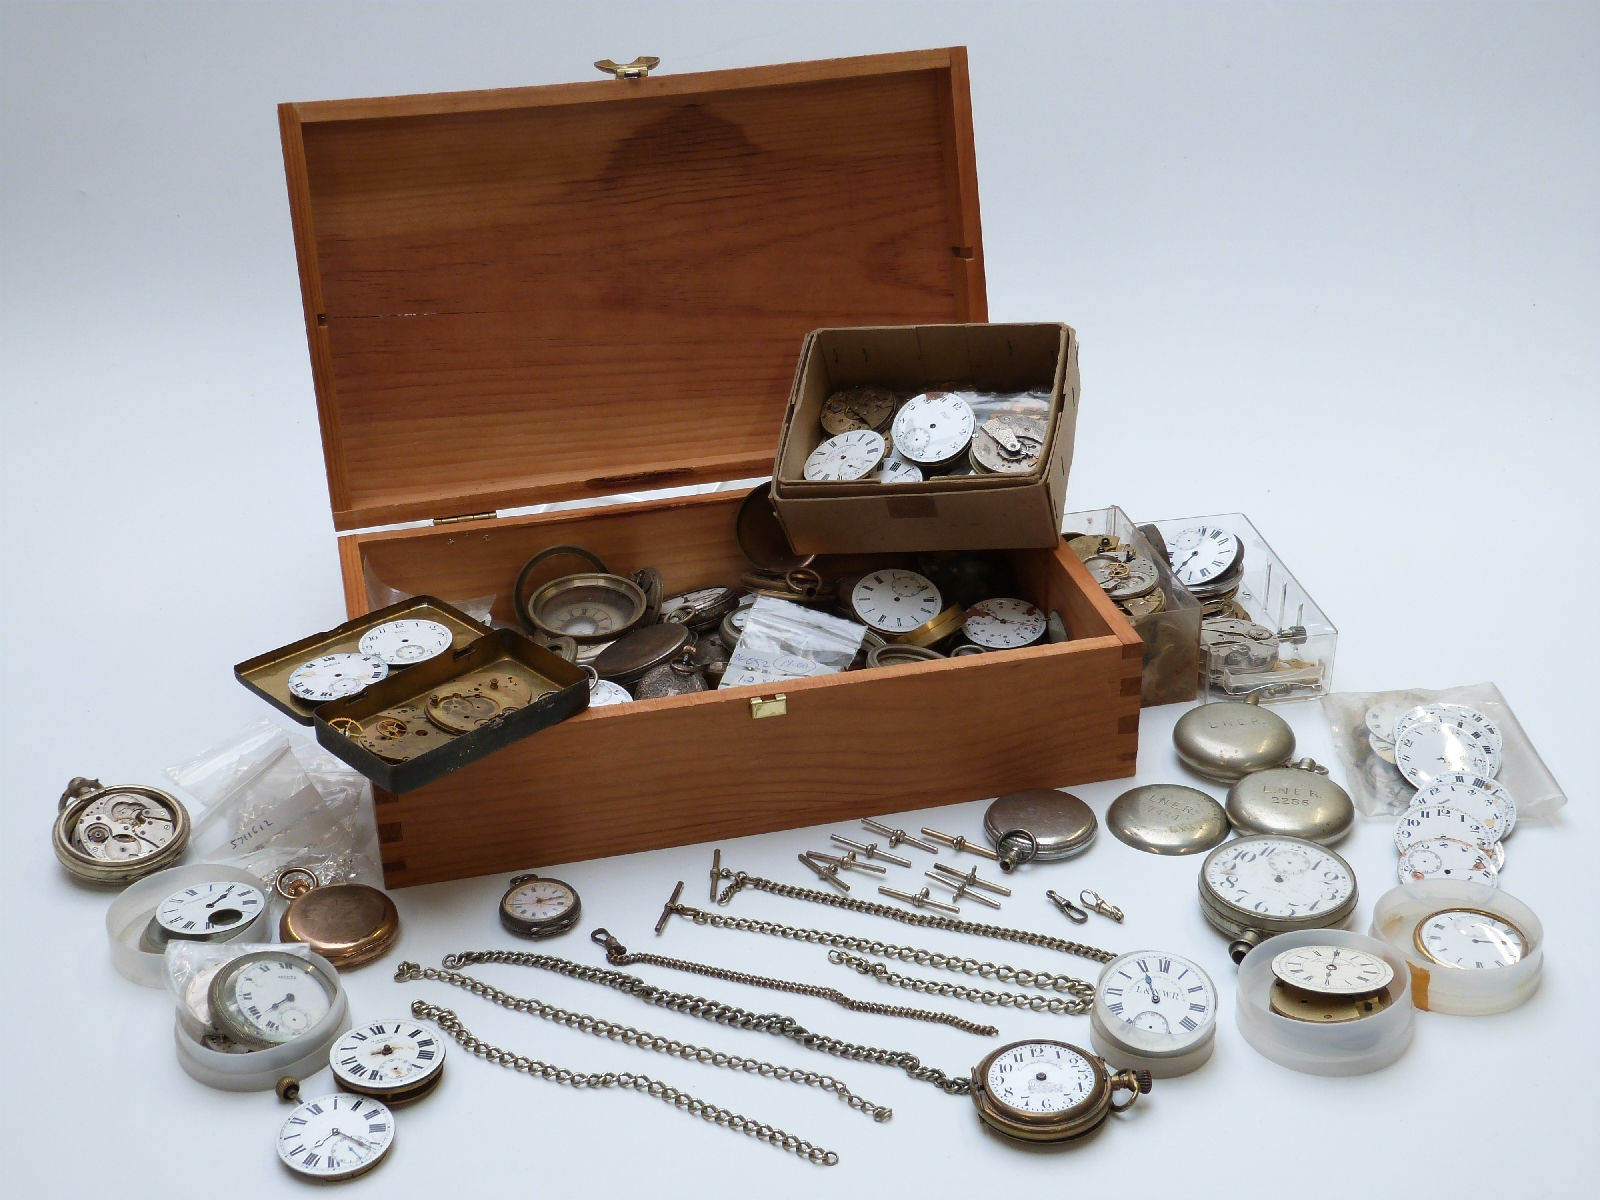 A large quantity of incomplete pocket watches, dials, movements and cases etc, includes stamped L.